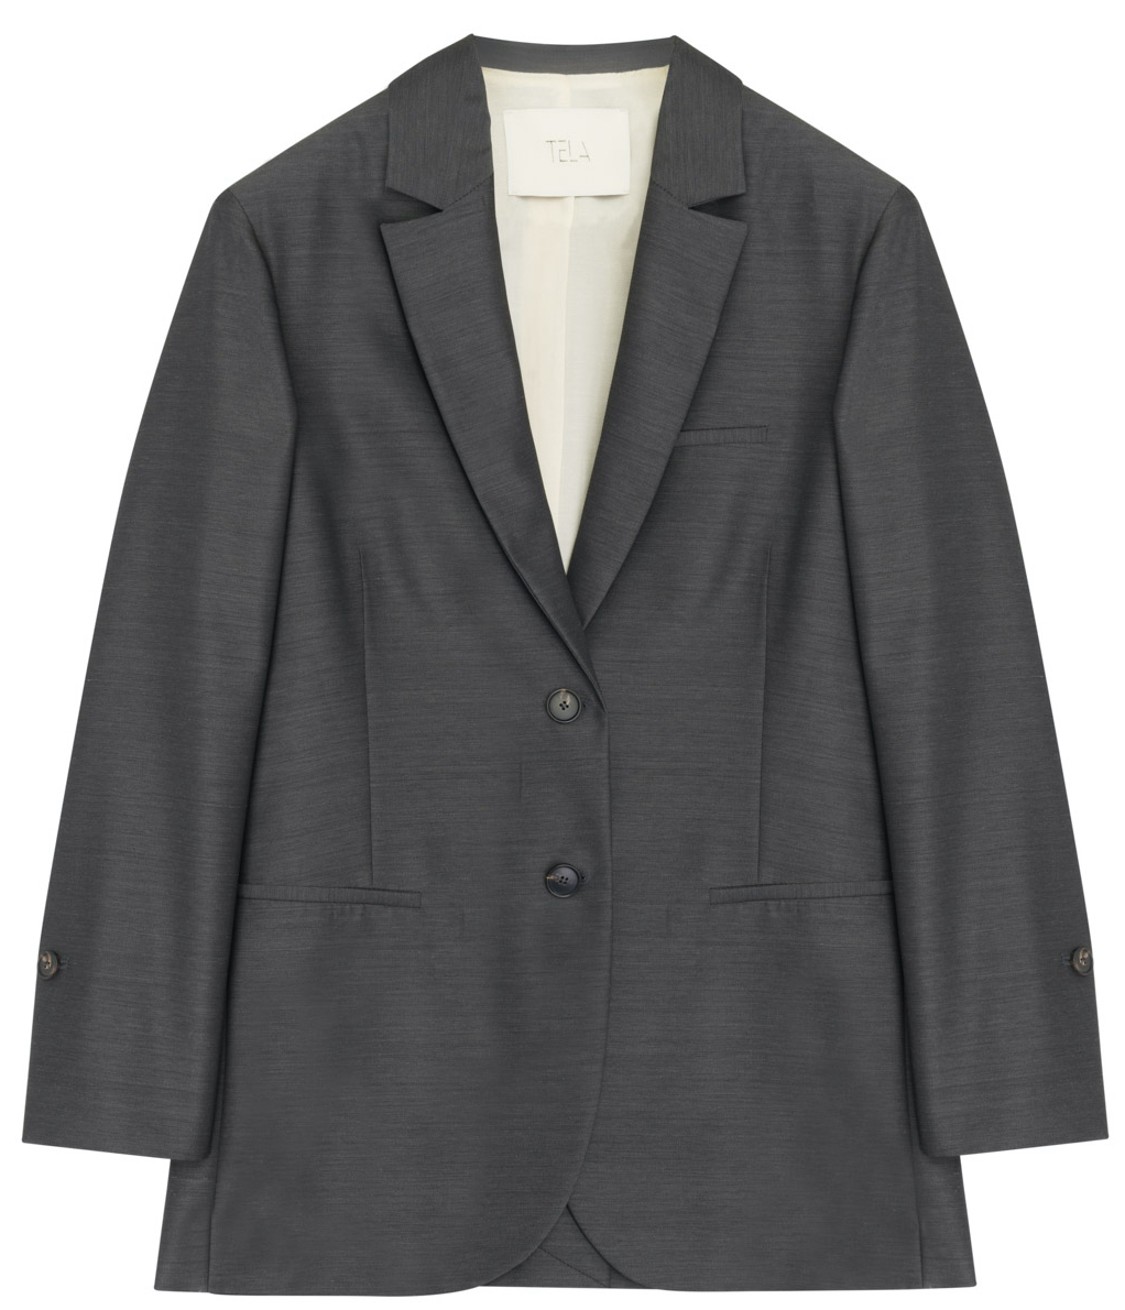 shop Tela  Jackets: Jackets Tela, Lucente model, oversize, long sleeves, two buttons on front, lateral pockets.

Composition: 50% virgin wool, 50% viscose.
Lining: 100% cotton. number 2550